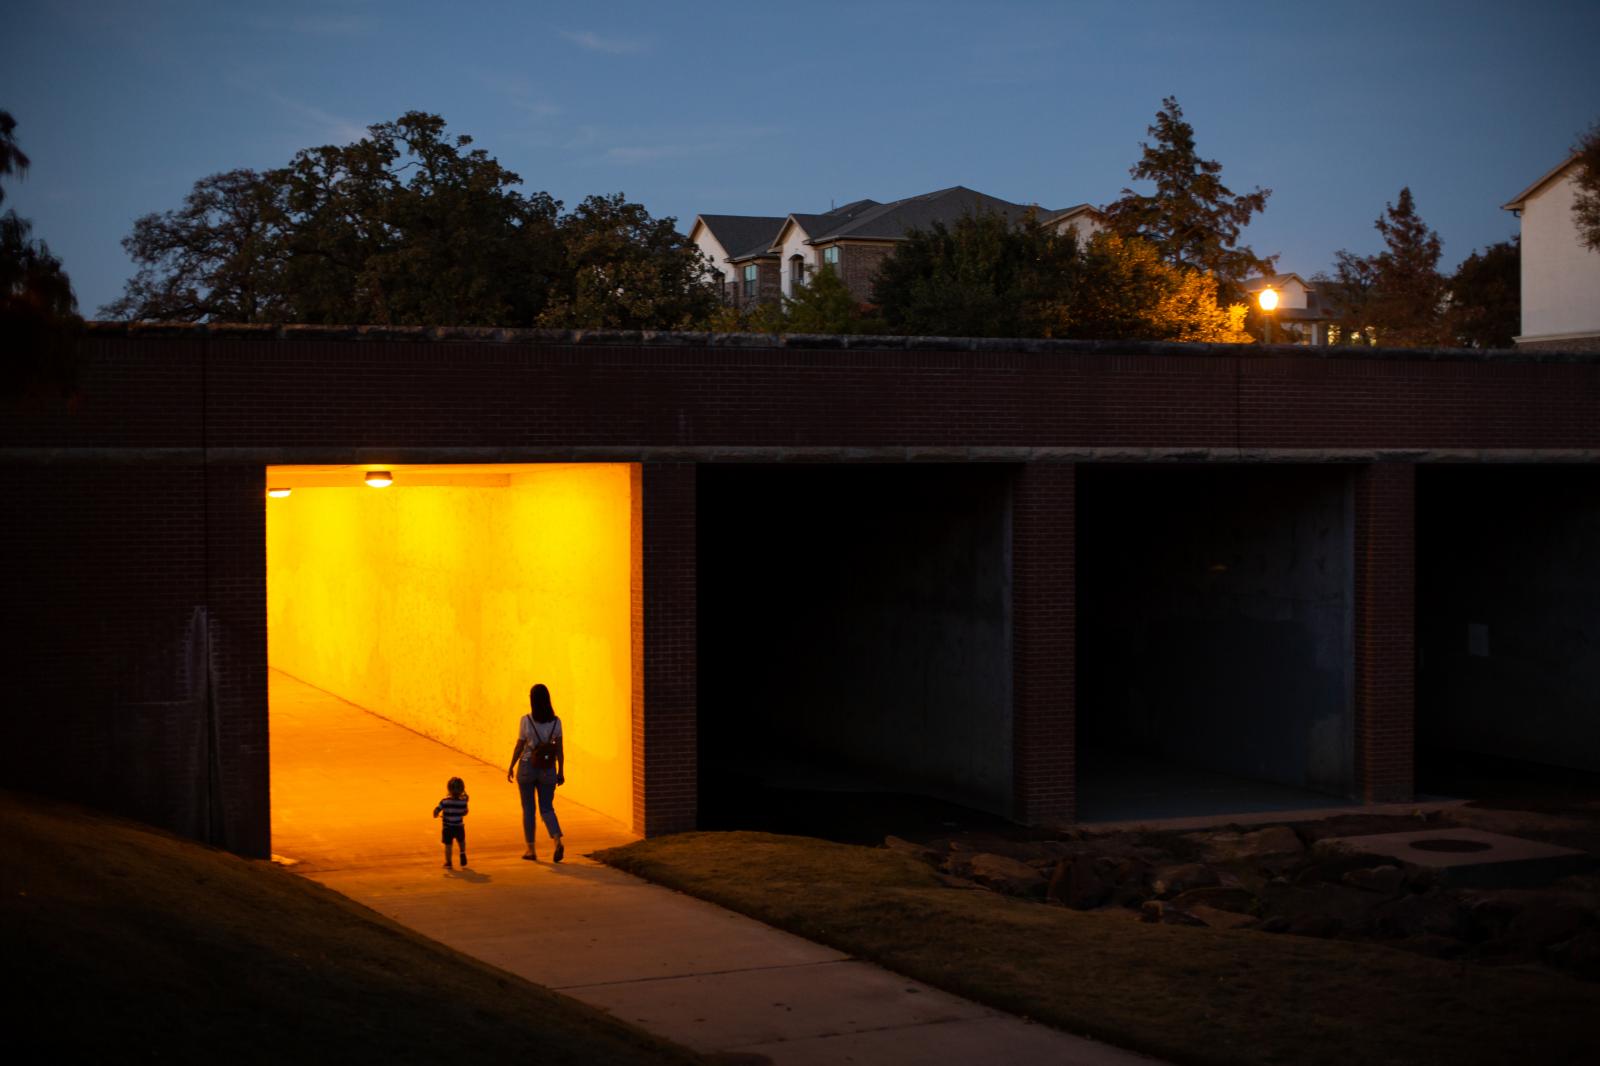 Thumbnail of 10/9/20 - A mother and son walk _at glows out of a city overpass.